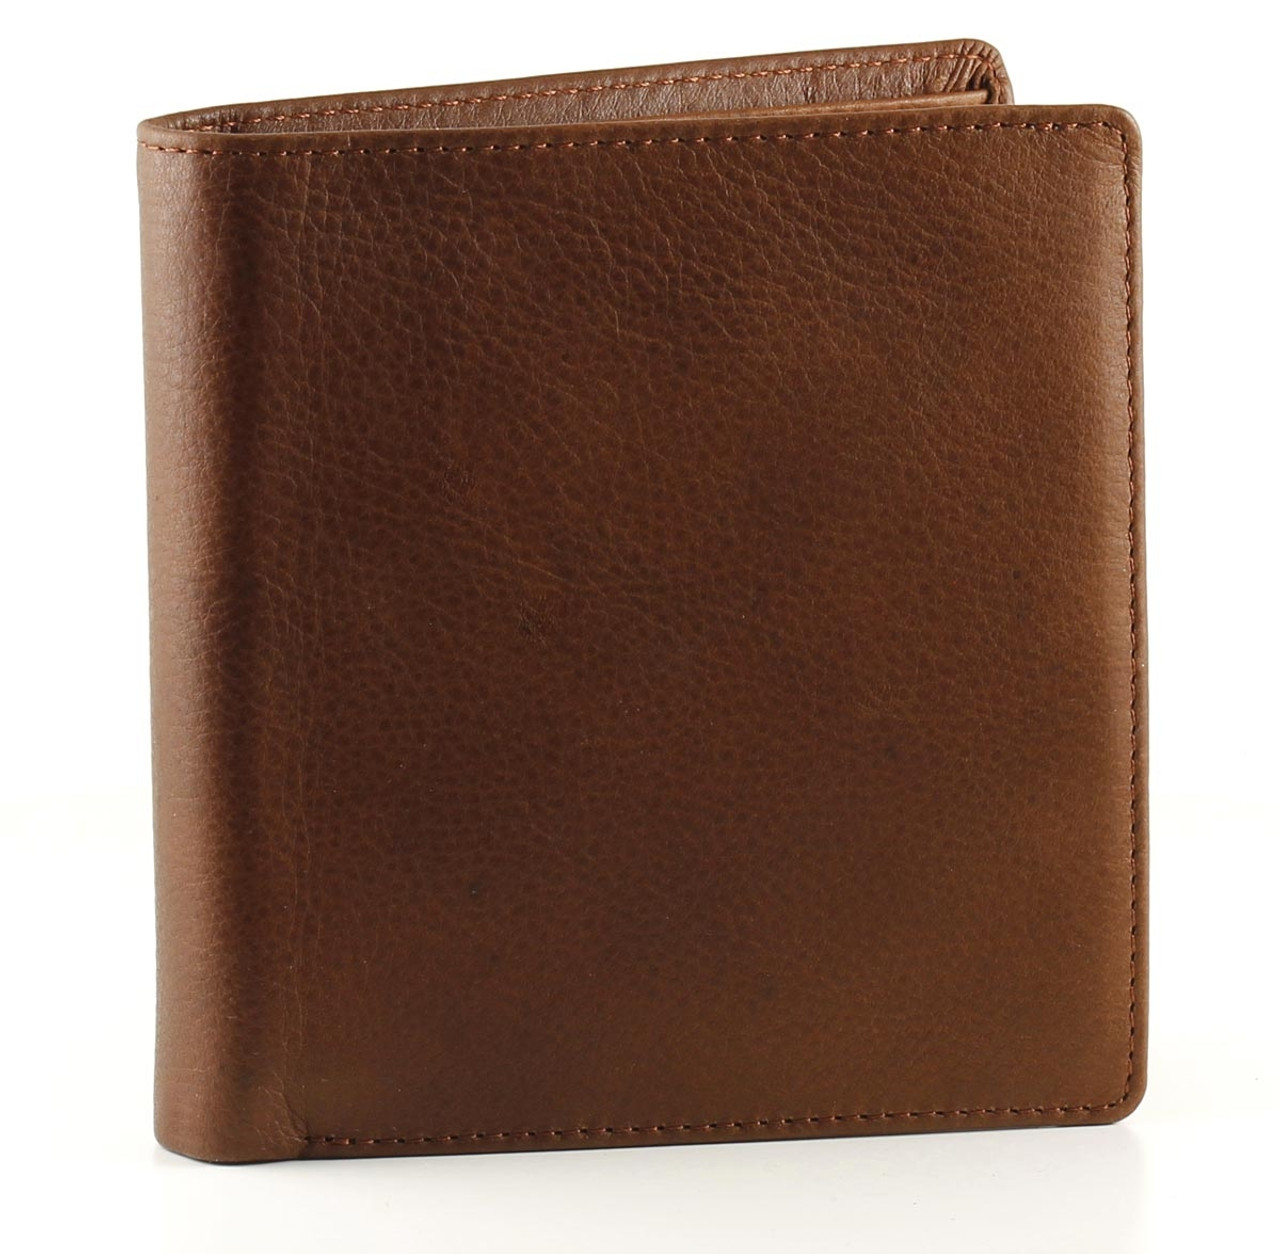 RFID Osgoode Marley Extra Page Hipster Wallets for Men